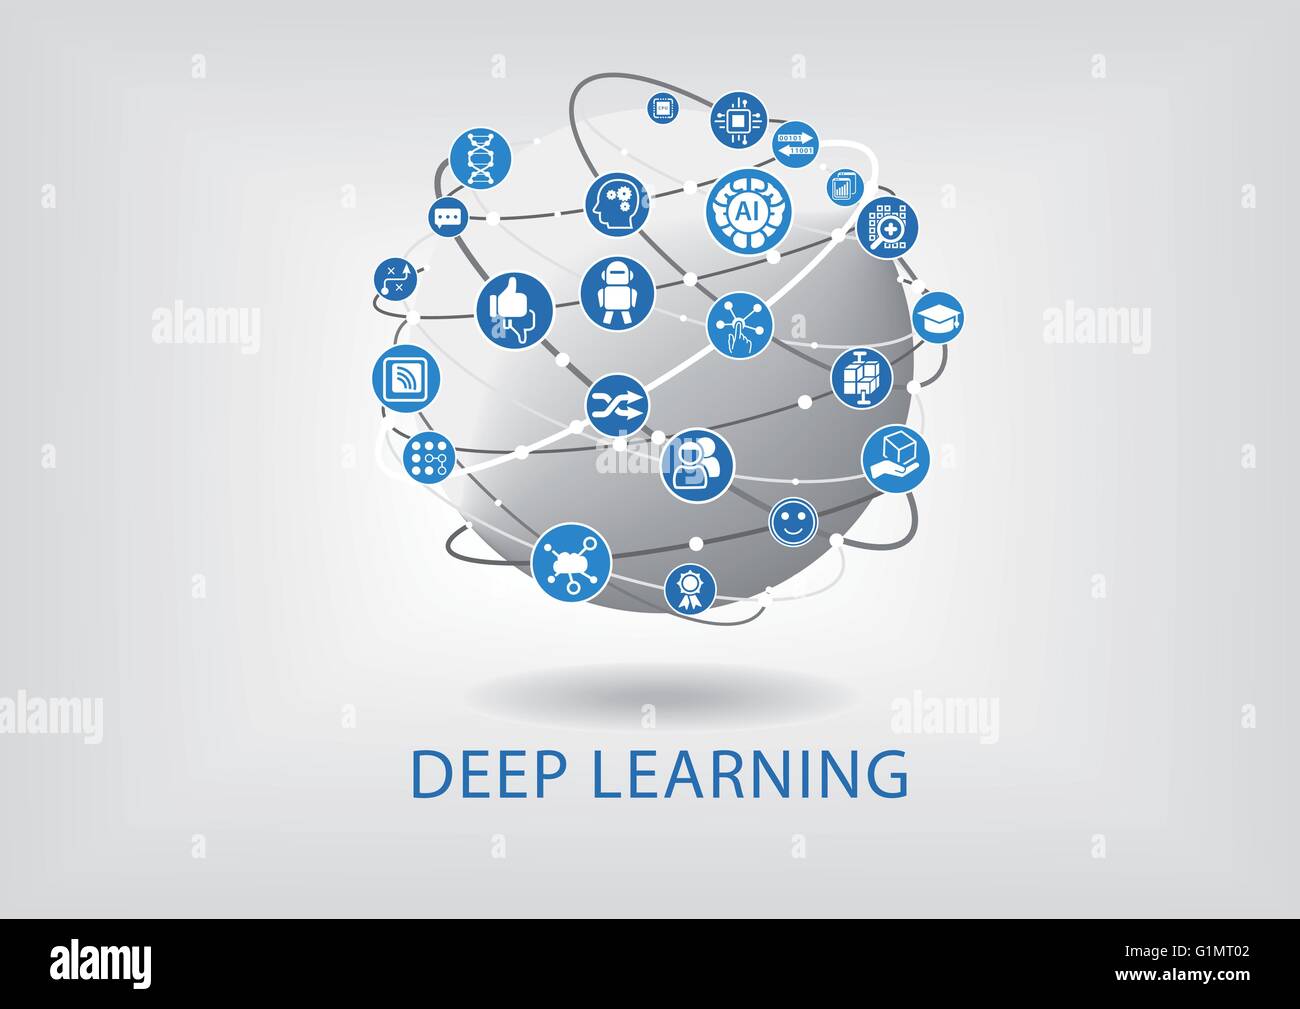 Deep learning concept as vector illustration Stock Vector